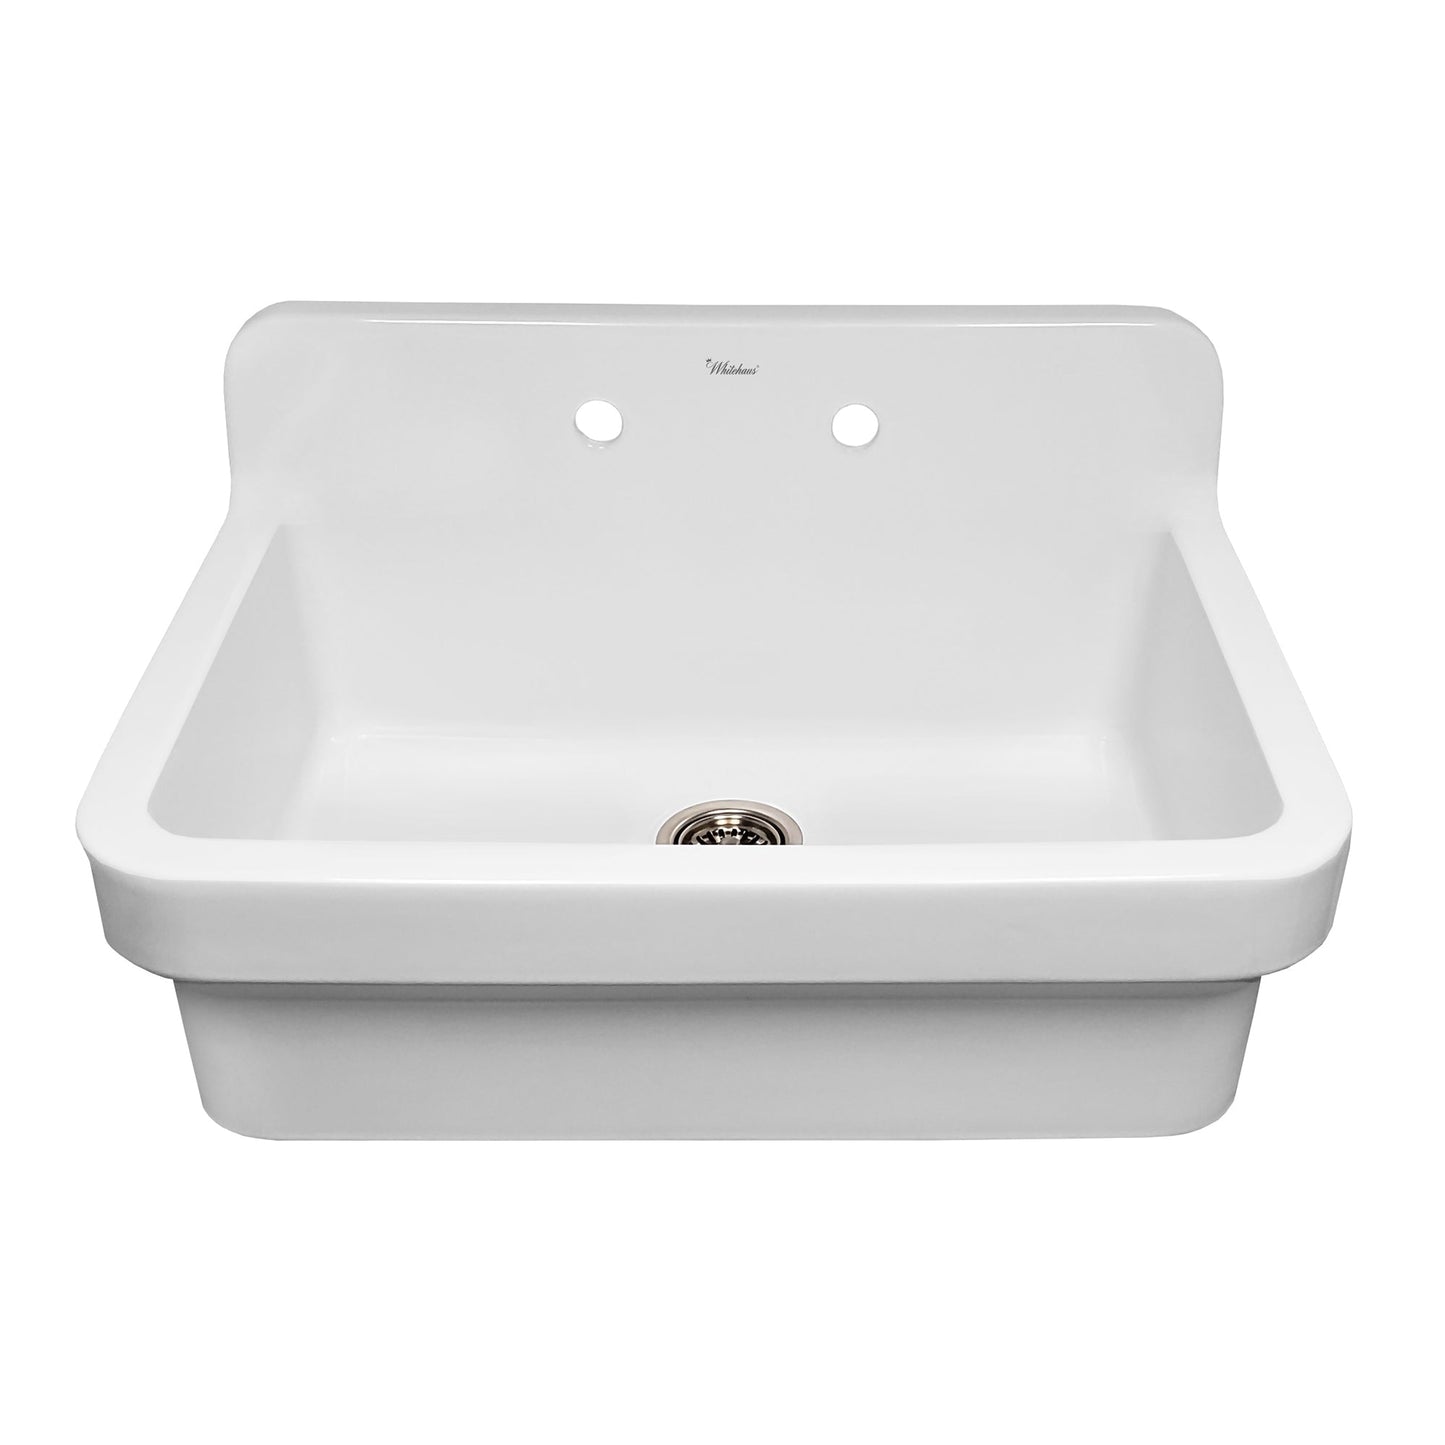 Whitehaus Old Fashioned Country Fireclay Utility Sink with High Backsplash